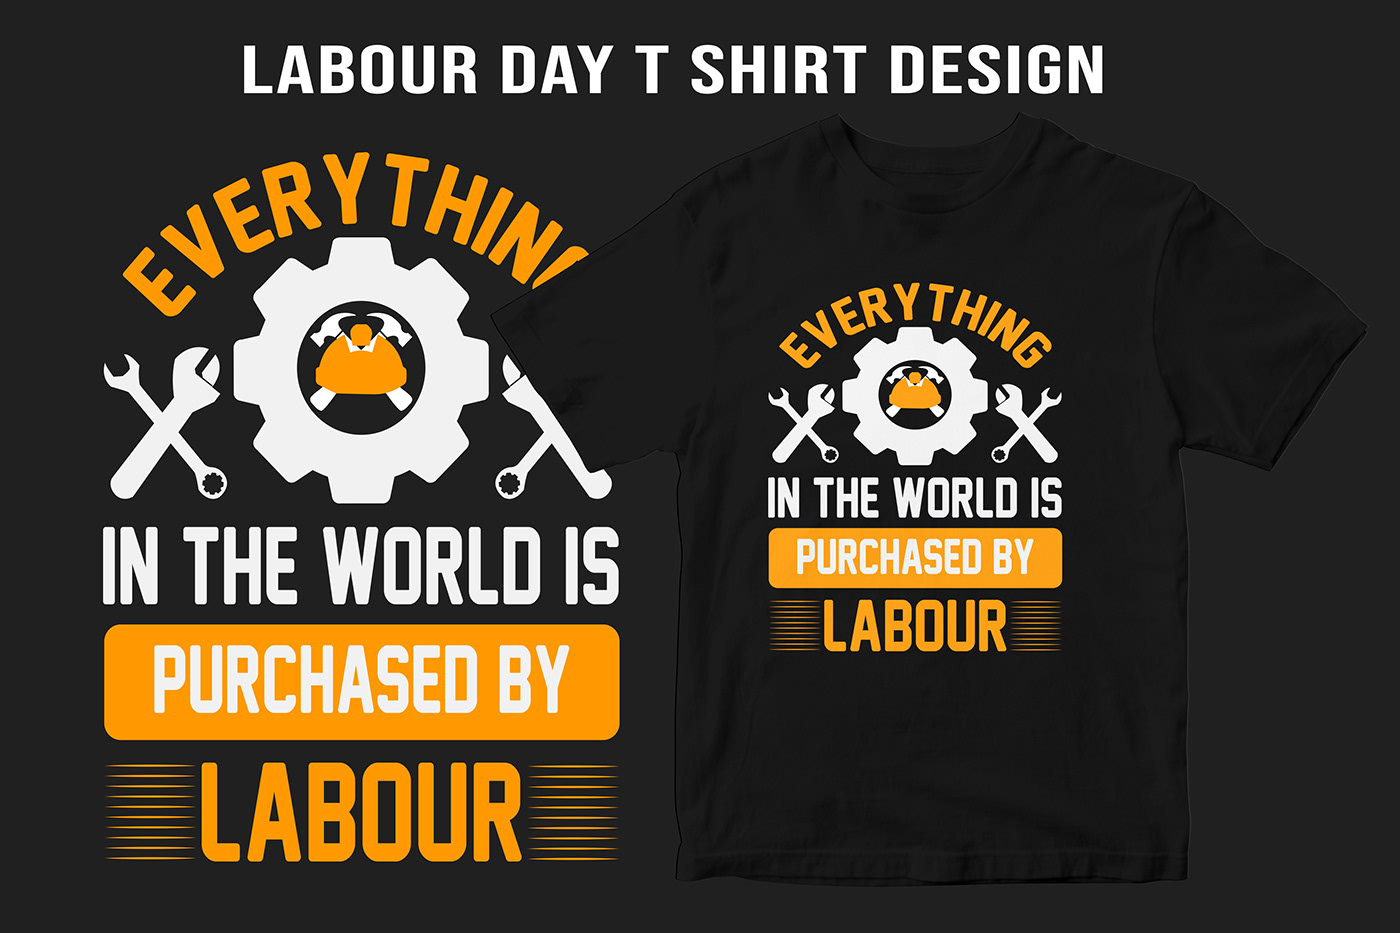 Everything Everything in the world Labour purchased PURCHASED BY PURCHASED BY LABOUR THE WORLD IS PURCHASED world world is purchased